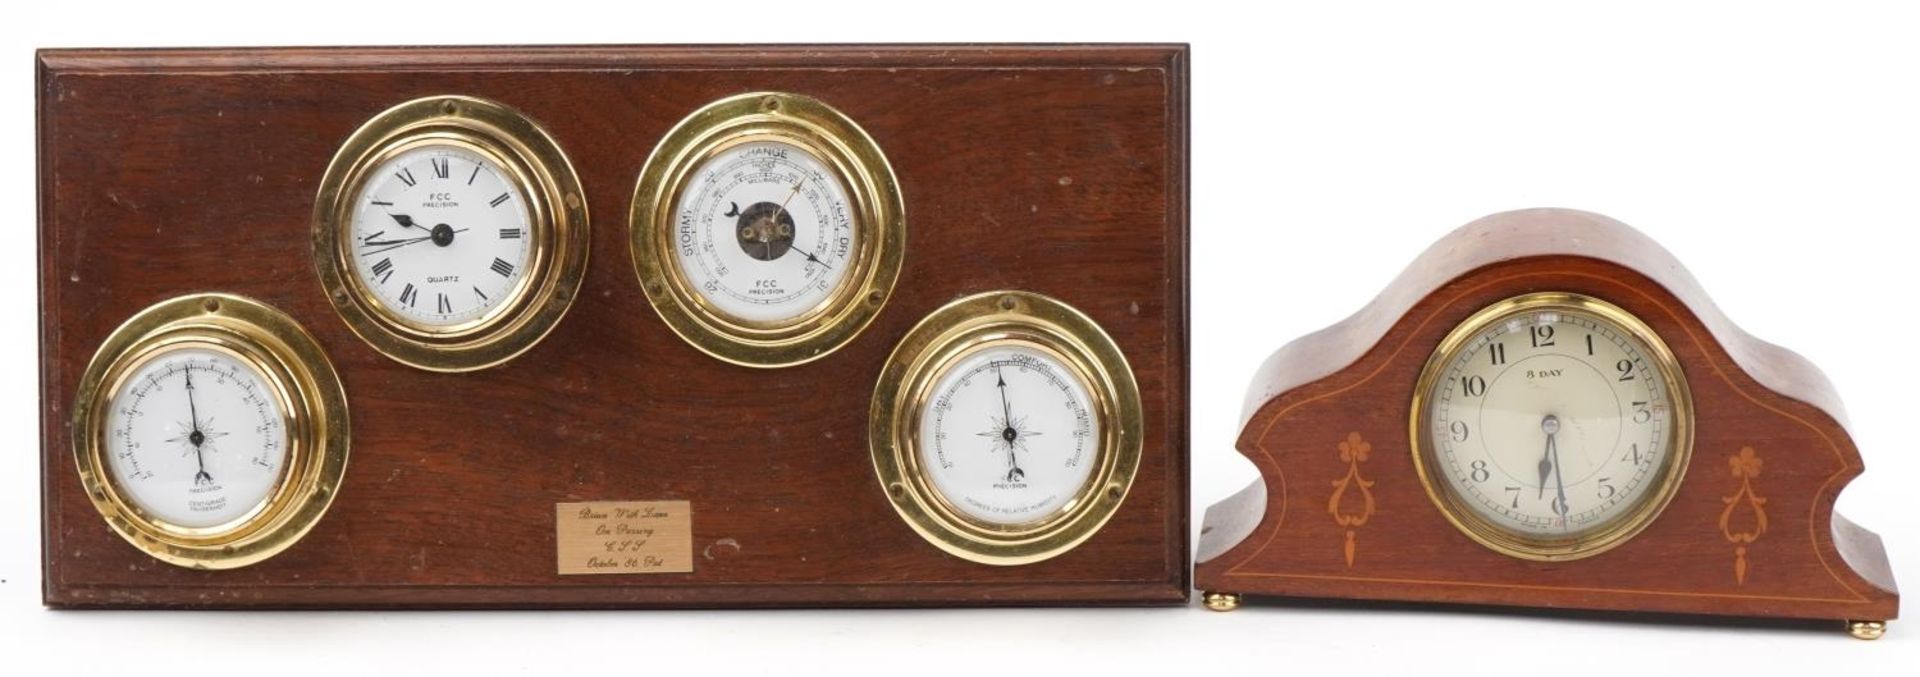 Edwardian inlaid mahogany eight day mantle clock and an oak backed weather station with clock and